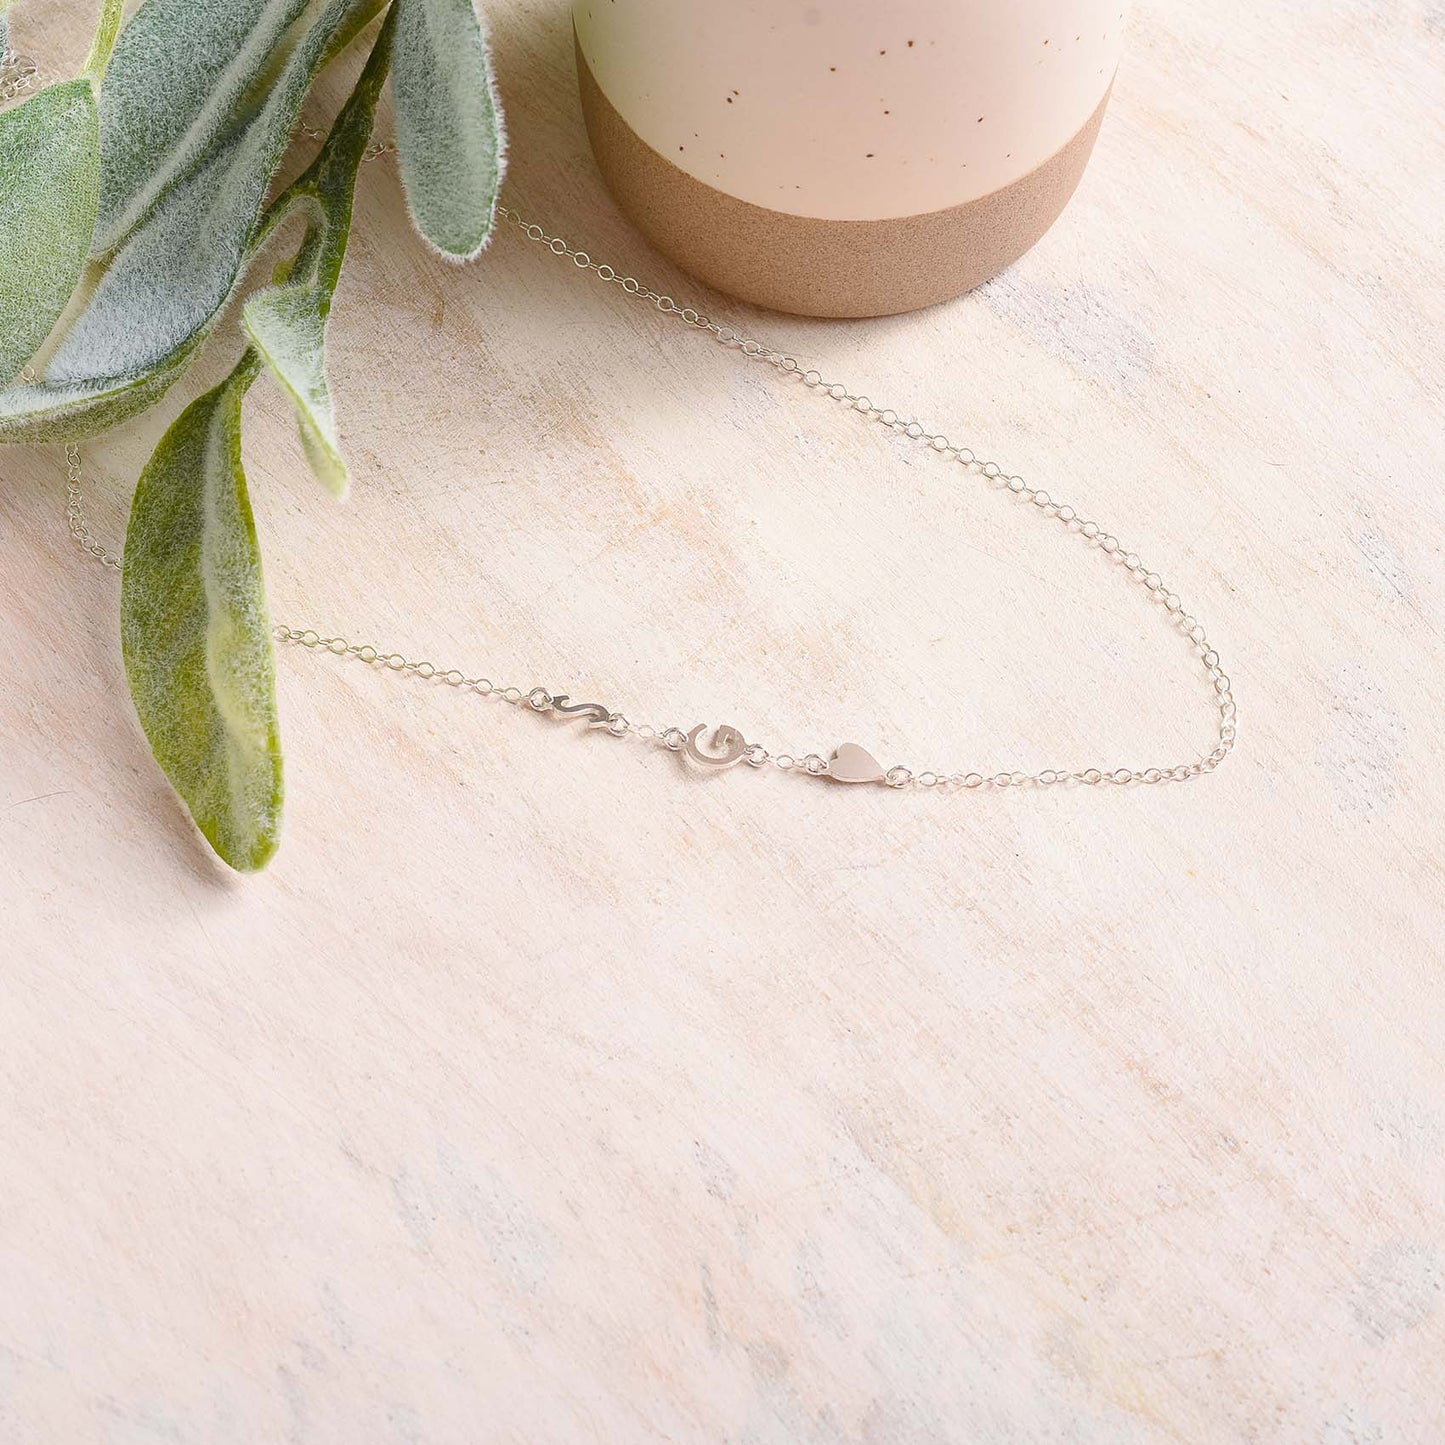 Kids' Initials, Sentimental Jewelry Gift for Mom